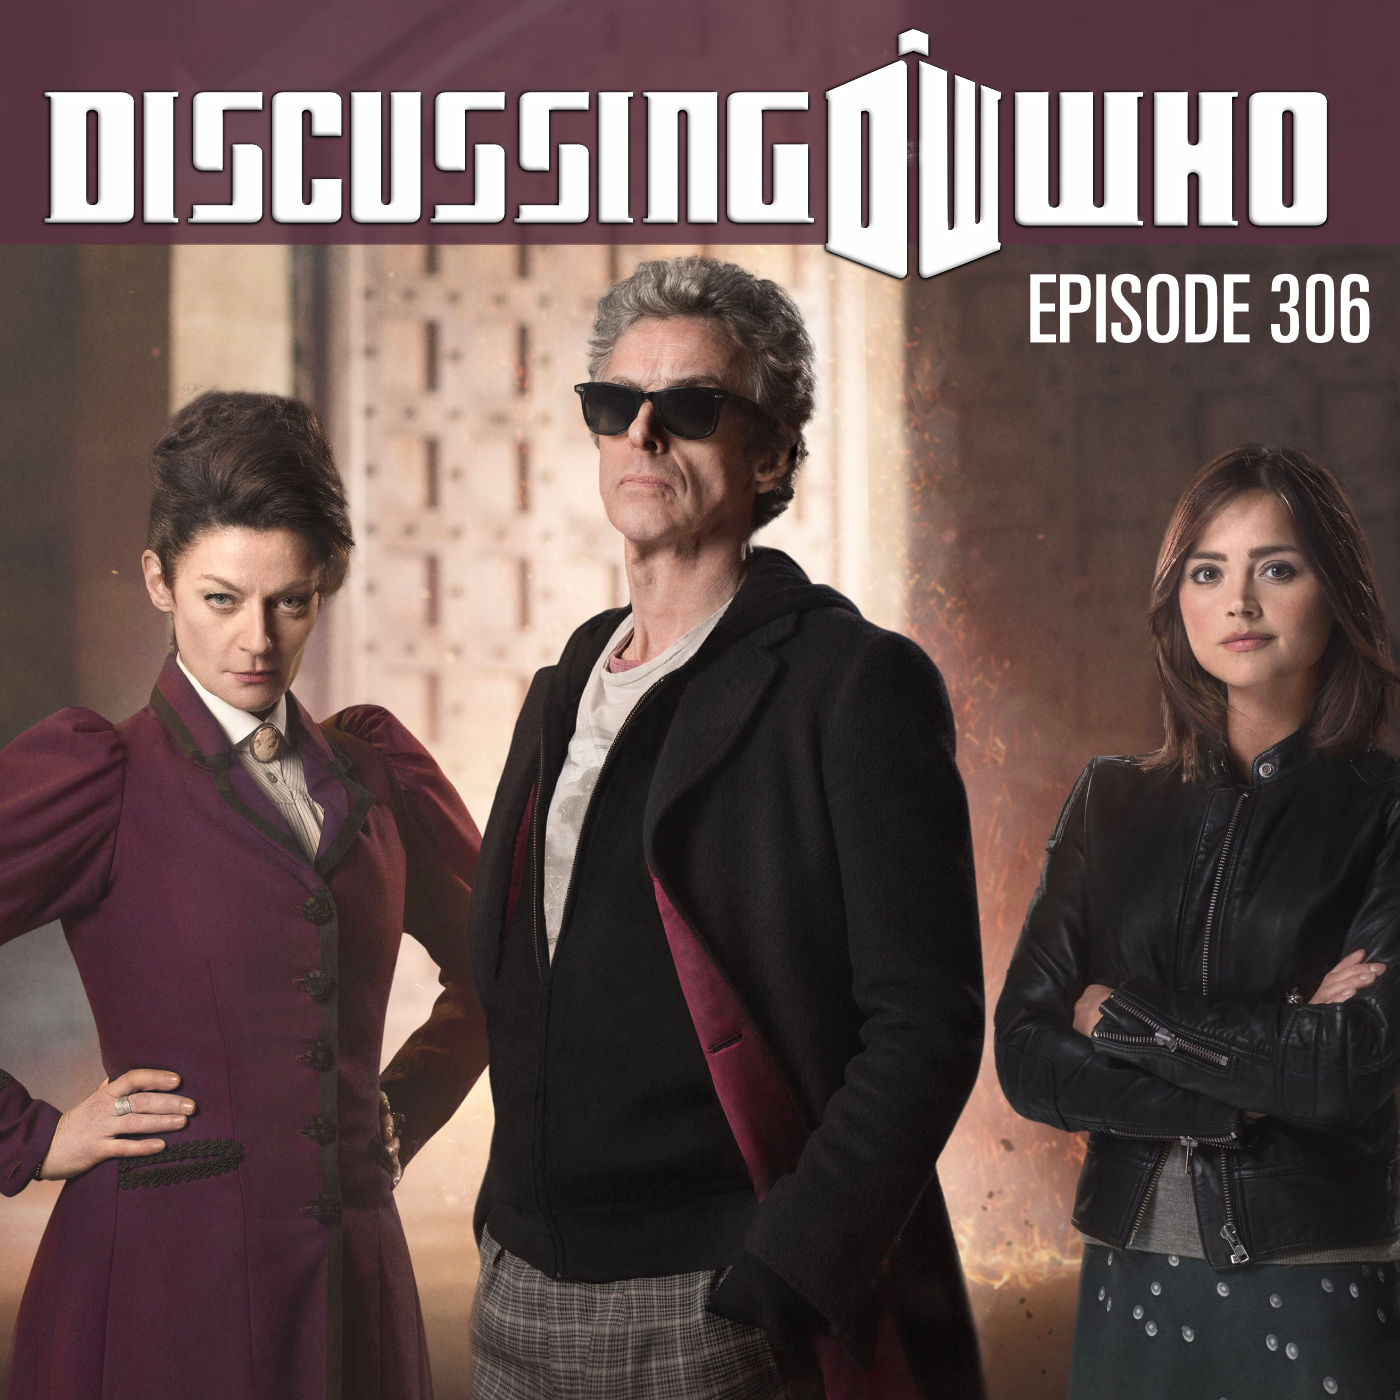 Episode 306: Review of The Magician’s Apprentice, Doctor Who Series 9 Episode 1